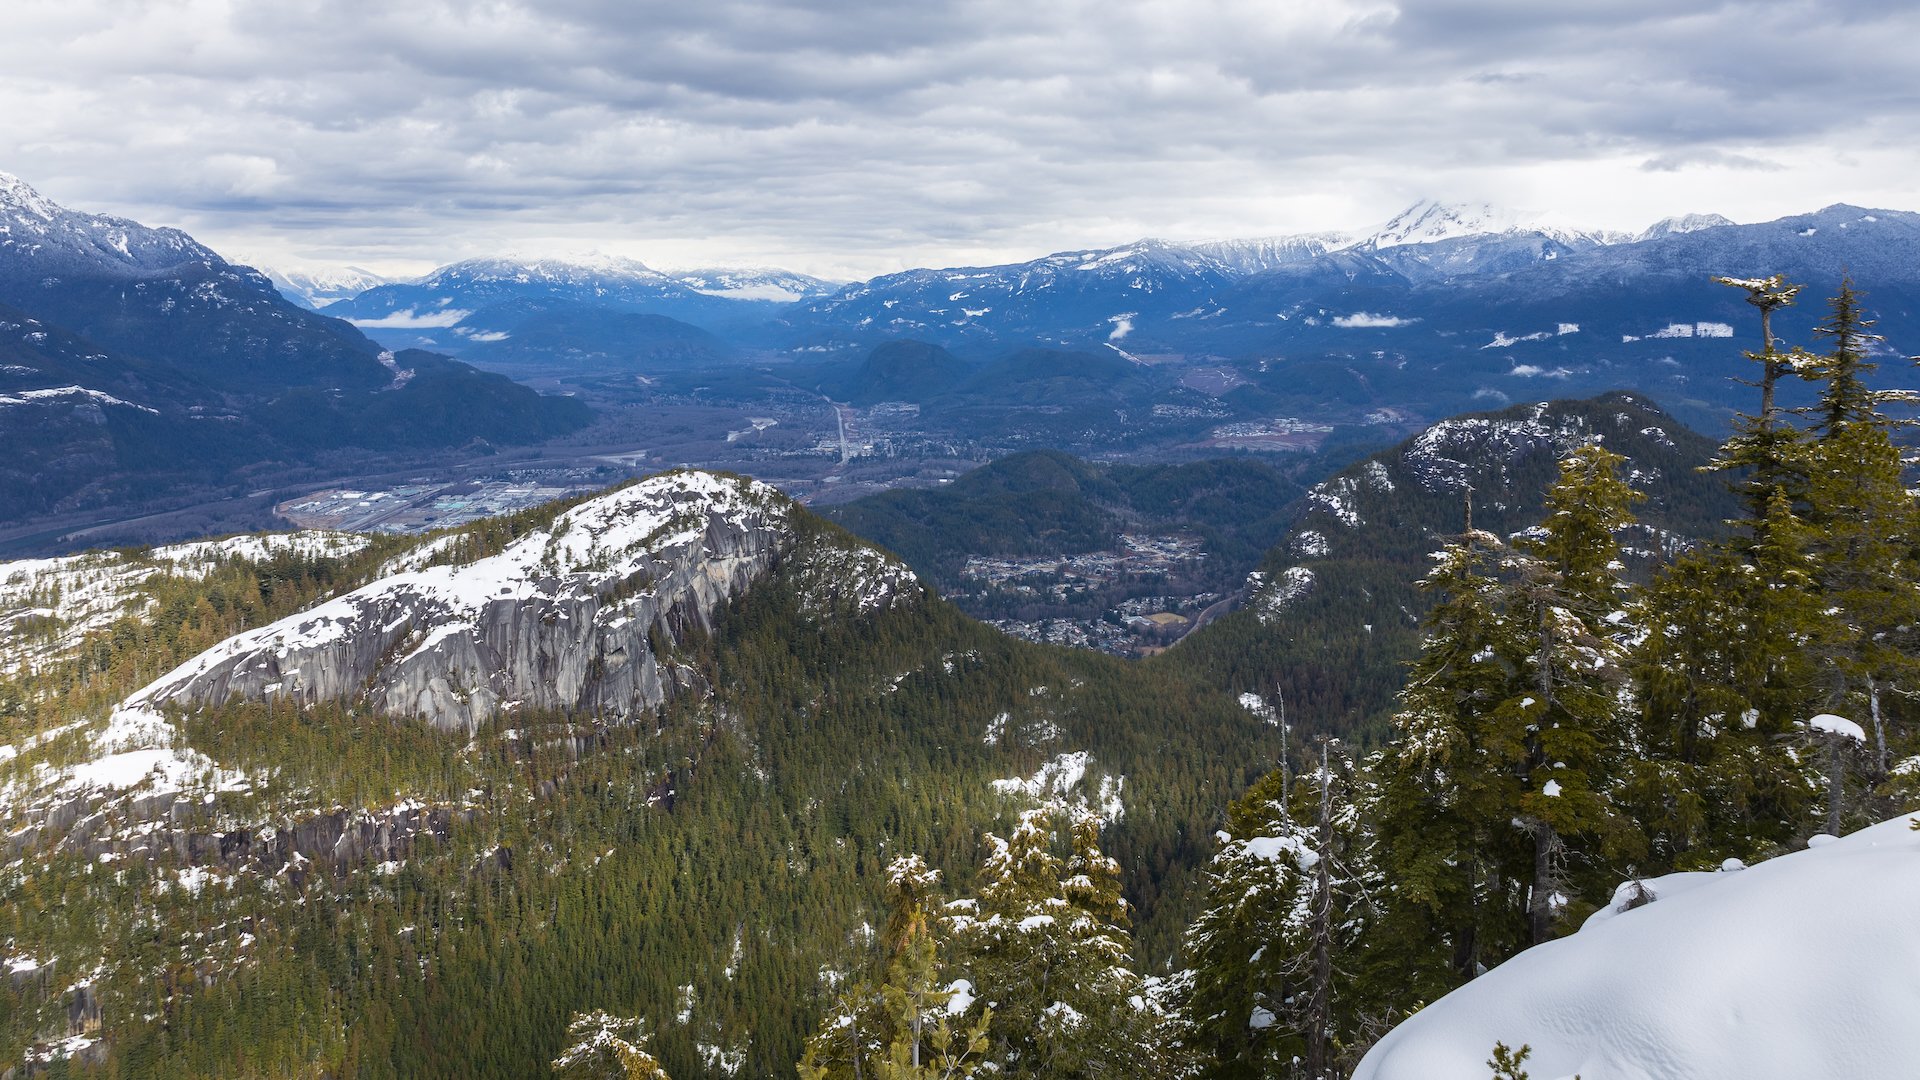  Looking out the other direction towards Squamish, over the Chief. 